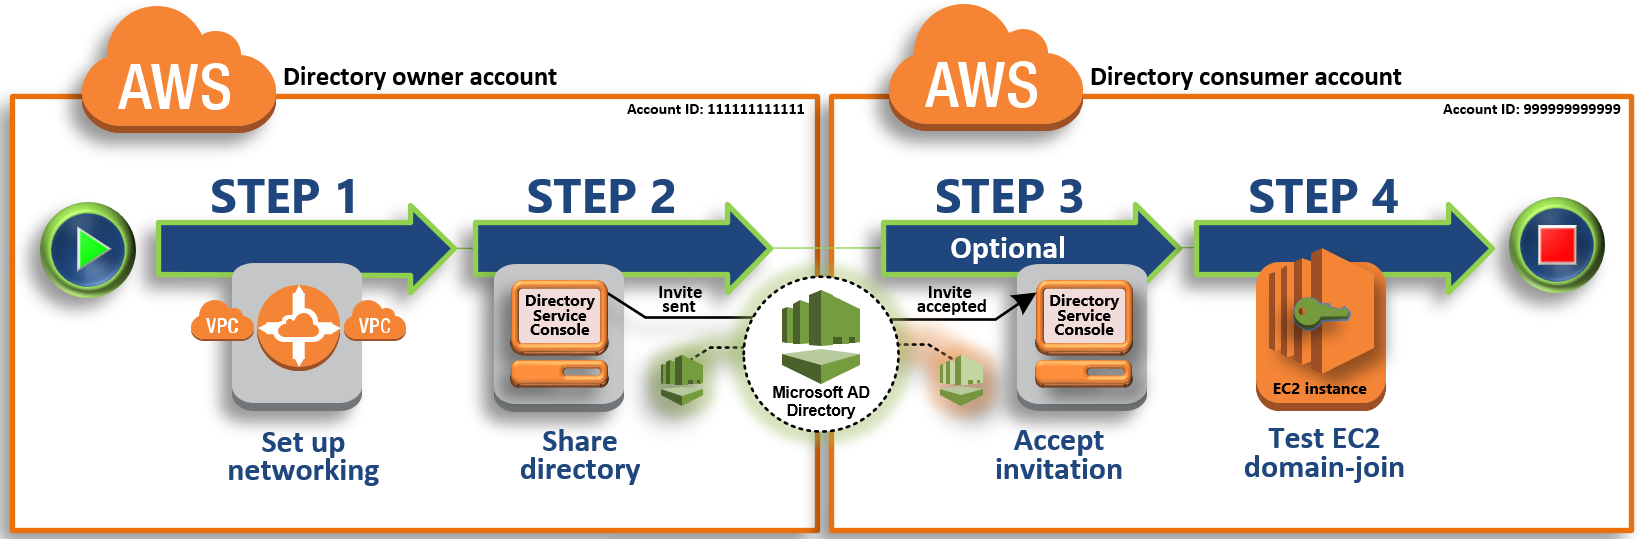 Directory services. Каталог ad. What does the AWS do. Account owner. Microsoft owner